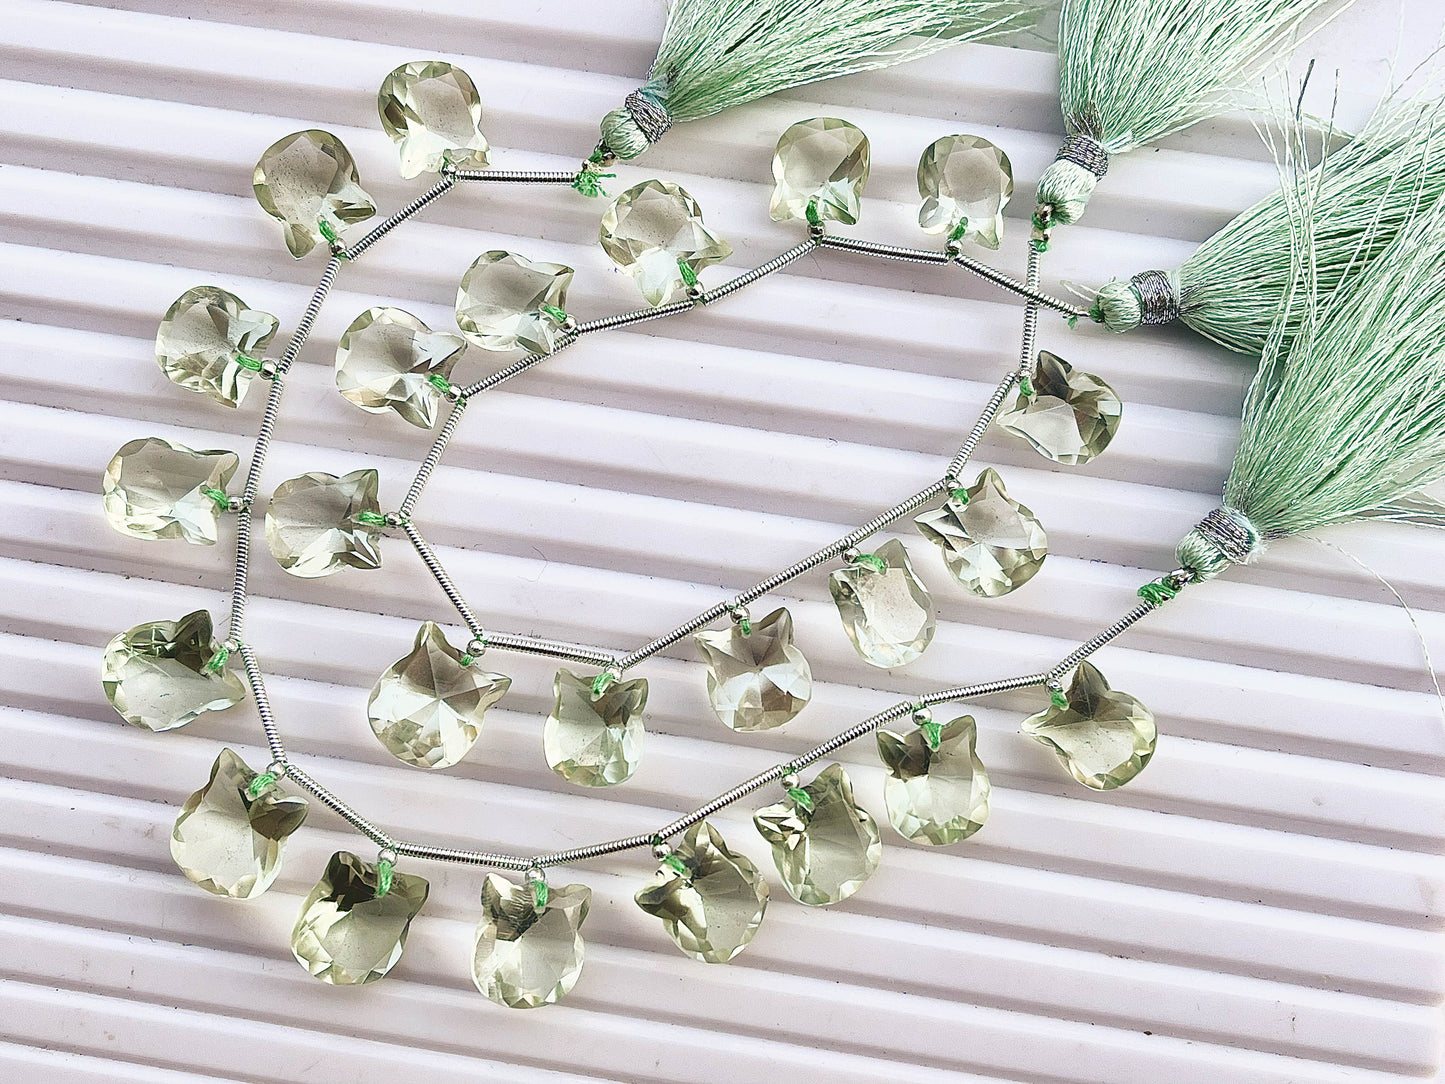 Green Amethyst Cat Shape Faceted Briolette Beads Beadsforyourjewelry